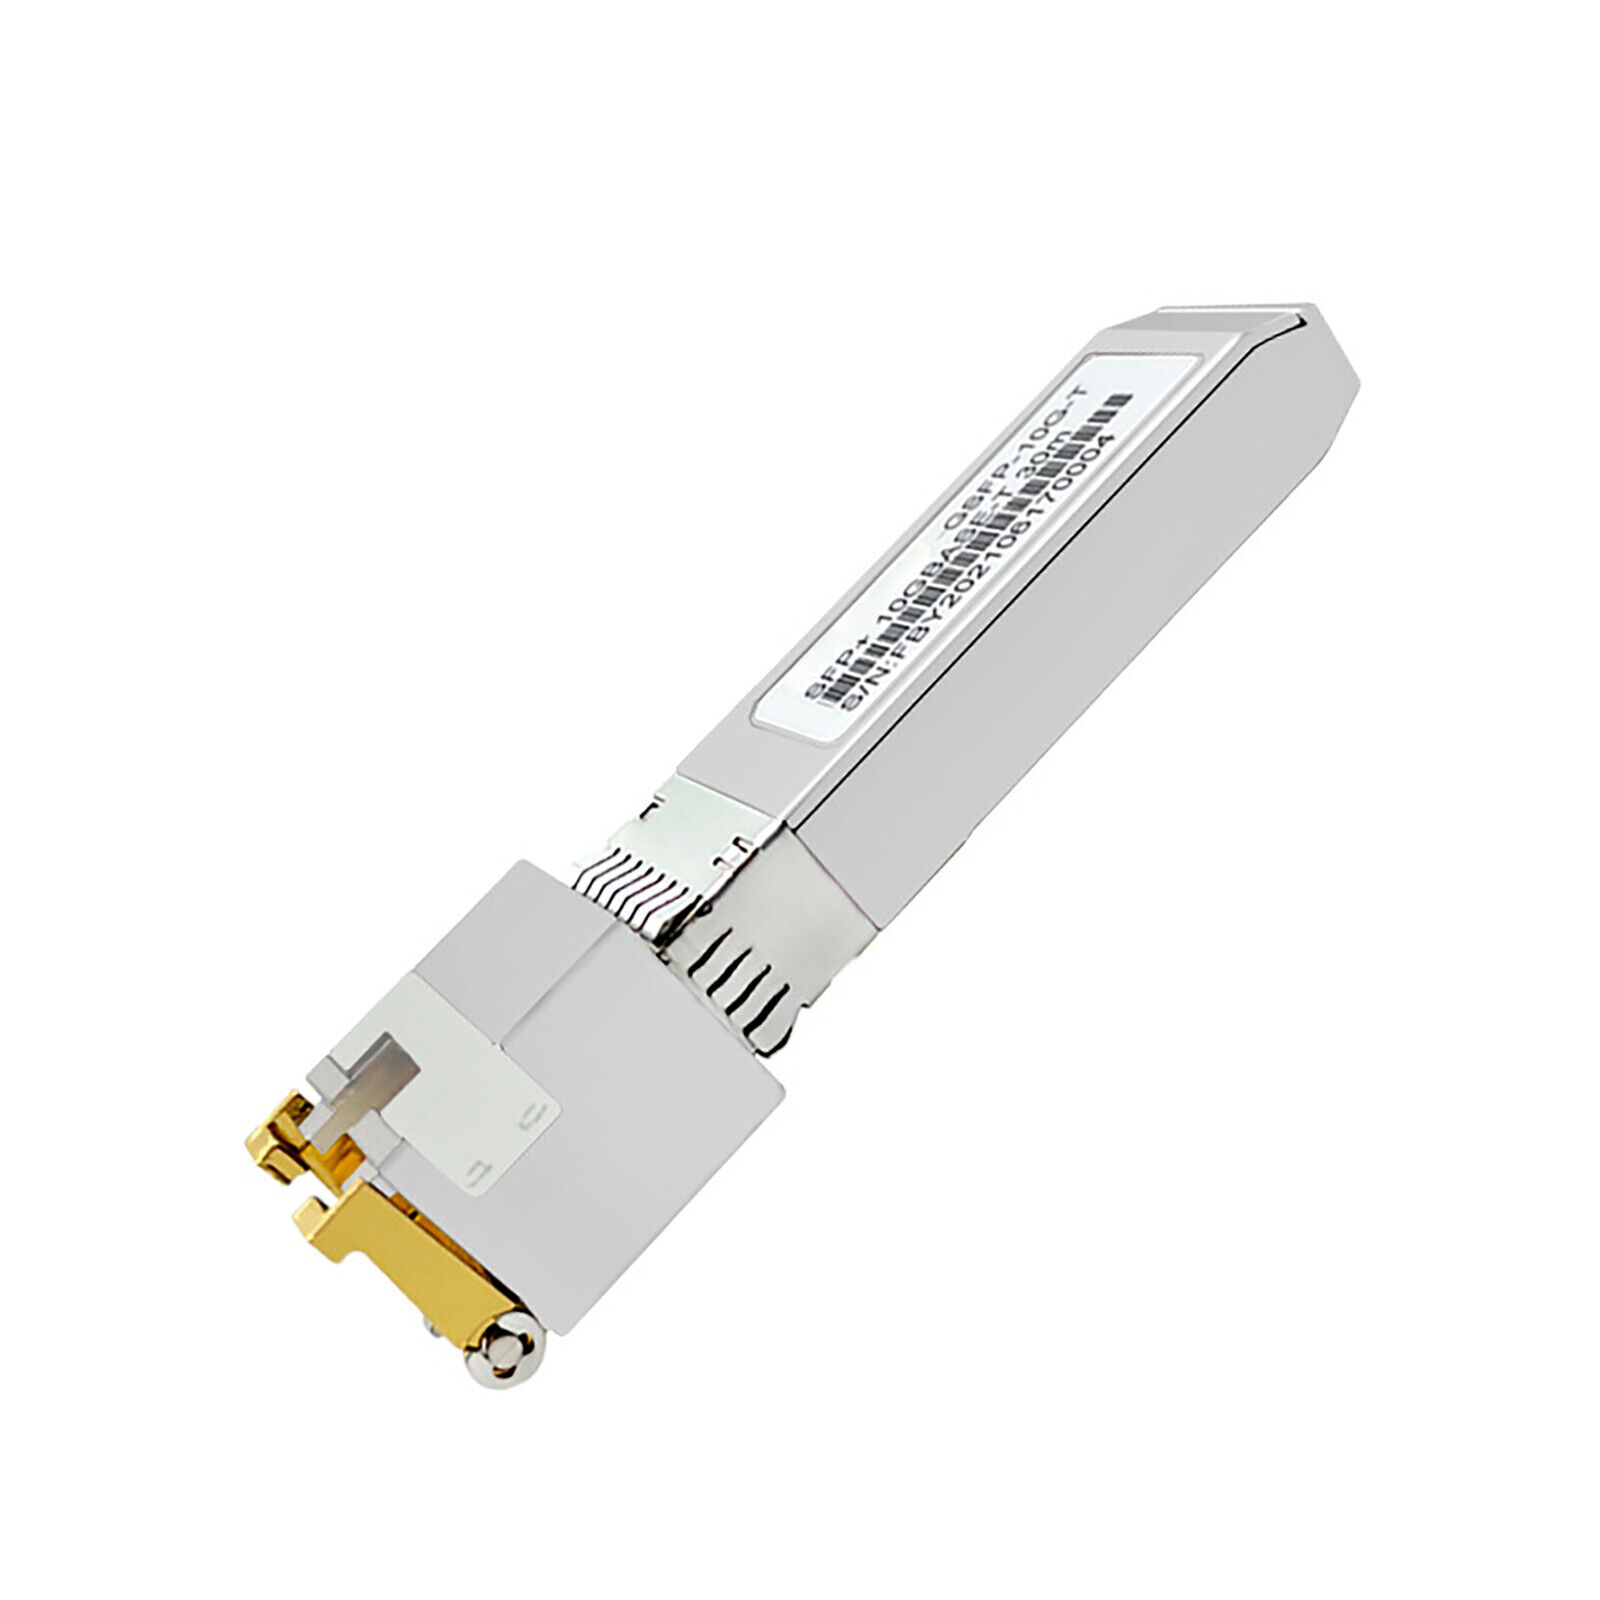 10GBase-T Transceiver SFP-10G-T 10G SFP+ to RJ45 Copper 30M Fully Compatibility